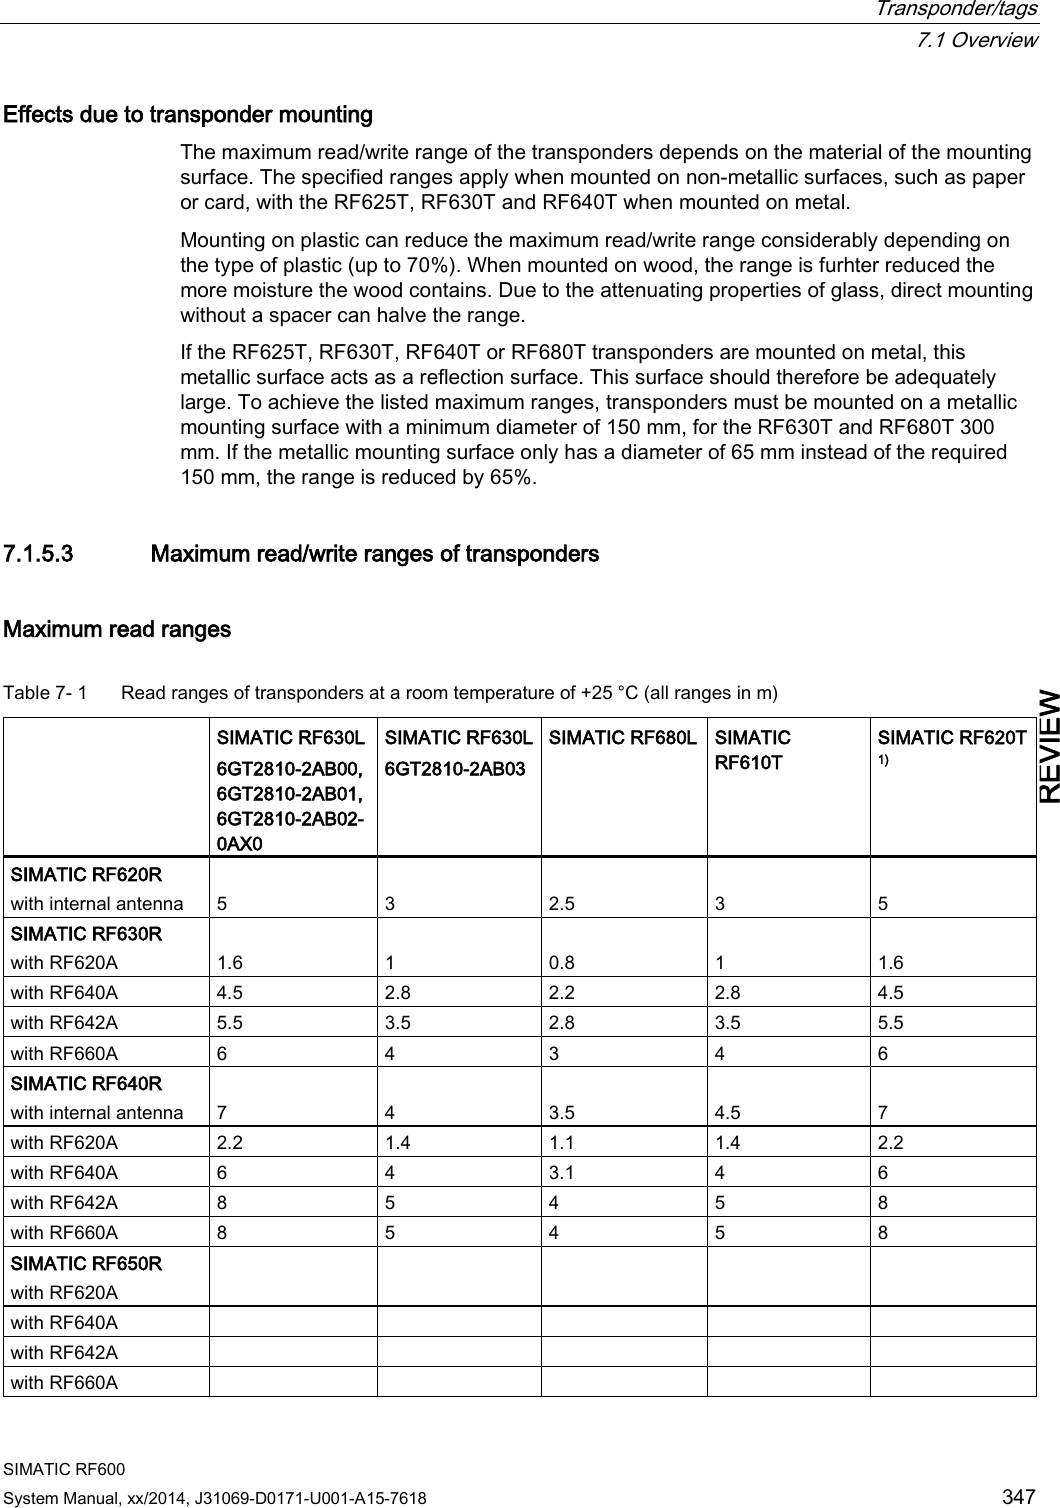  Transponder/tags  7.1 Overview SIMATIC RF600 System Manual, xx/2014, J31069-D0171-U001-A15-7618 347 REVIEW Effects due to transponder mounting The maximum read/write range of the transponders depends on the material of the mounting surface. The specified ranges apply when mounted on non-metallic surfaces, such as paper or card, with the RF625T, RF630T and RF640T when mounted on metal.  Mounting on plastic can reduce the maximum read/write range considerably depending on the type of plastic (up to 70%). When mounted on wood, the range is furhter reduced the more moisture the wood contains. Due to the attenuating properties of glass, direct mounting without a spacer can halve the range. If the RF625T, RF630T, RF640T or RF680T transponders are mounted on metal, this metallic surface acts as a reflection surface. This surface should therefore be adequately large. To achieve the listed maximum ranges, transponders must be mounted on a metallic mounting surface with a minimum diameter of 150 mm, for the RF630T and RF680T 300 mm. If the metallic mounting surface only has a diameter of 65 mm instead of the required 150 mm, the range is reduced by 65%. 7.1.5.3 Maximum read/write ranges of transponders Maximum read ranges Table 7- 1  Read ranges of transponders at a room temperature of +25 °C (all ranges in m)  SIMATIC RF630L 6GT2810-2AB00,  6GT2810-2AB01,  6GT2810-2AB02-0AX0 SIMATIC RF630L 6GT2810-2AB03 SIMATIC RF680L SIMATIC RF610T SIMATIC RF620T 1) SIMATIC RF620R with internal antenna  5  3  2.5  3  5 SIMATIC RF630R with RF620A  1.6  1  0.8  1  1.6 with RF640A 4.5 2.8 2.2 2.8 4.5 with RF642A 5.5 3.5 2.8 3.5 5.5 with RF660A 6 4 3 4 6 SIMATIC RF640R with internal antenna  7  4  3.5  4.5  7 with RF620A 2.2 1.4 1.1 1.4 2.2 with RF640A 6 4 3.1 4 6 with RF642A 8 5 4 5 8 with RF660A 8 5 4 5 8 SIMATIC RF650R with RF620A          with RF640A      with RF642A      with RF660A      